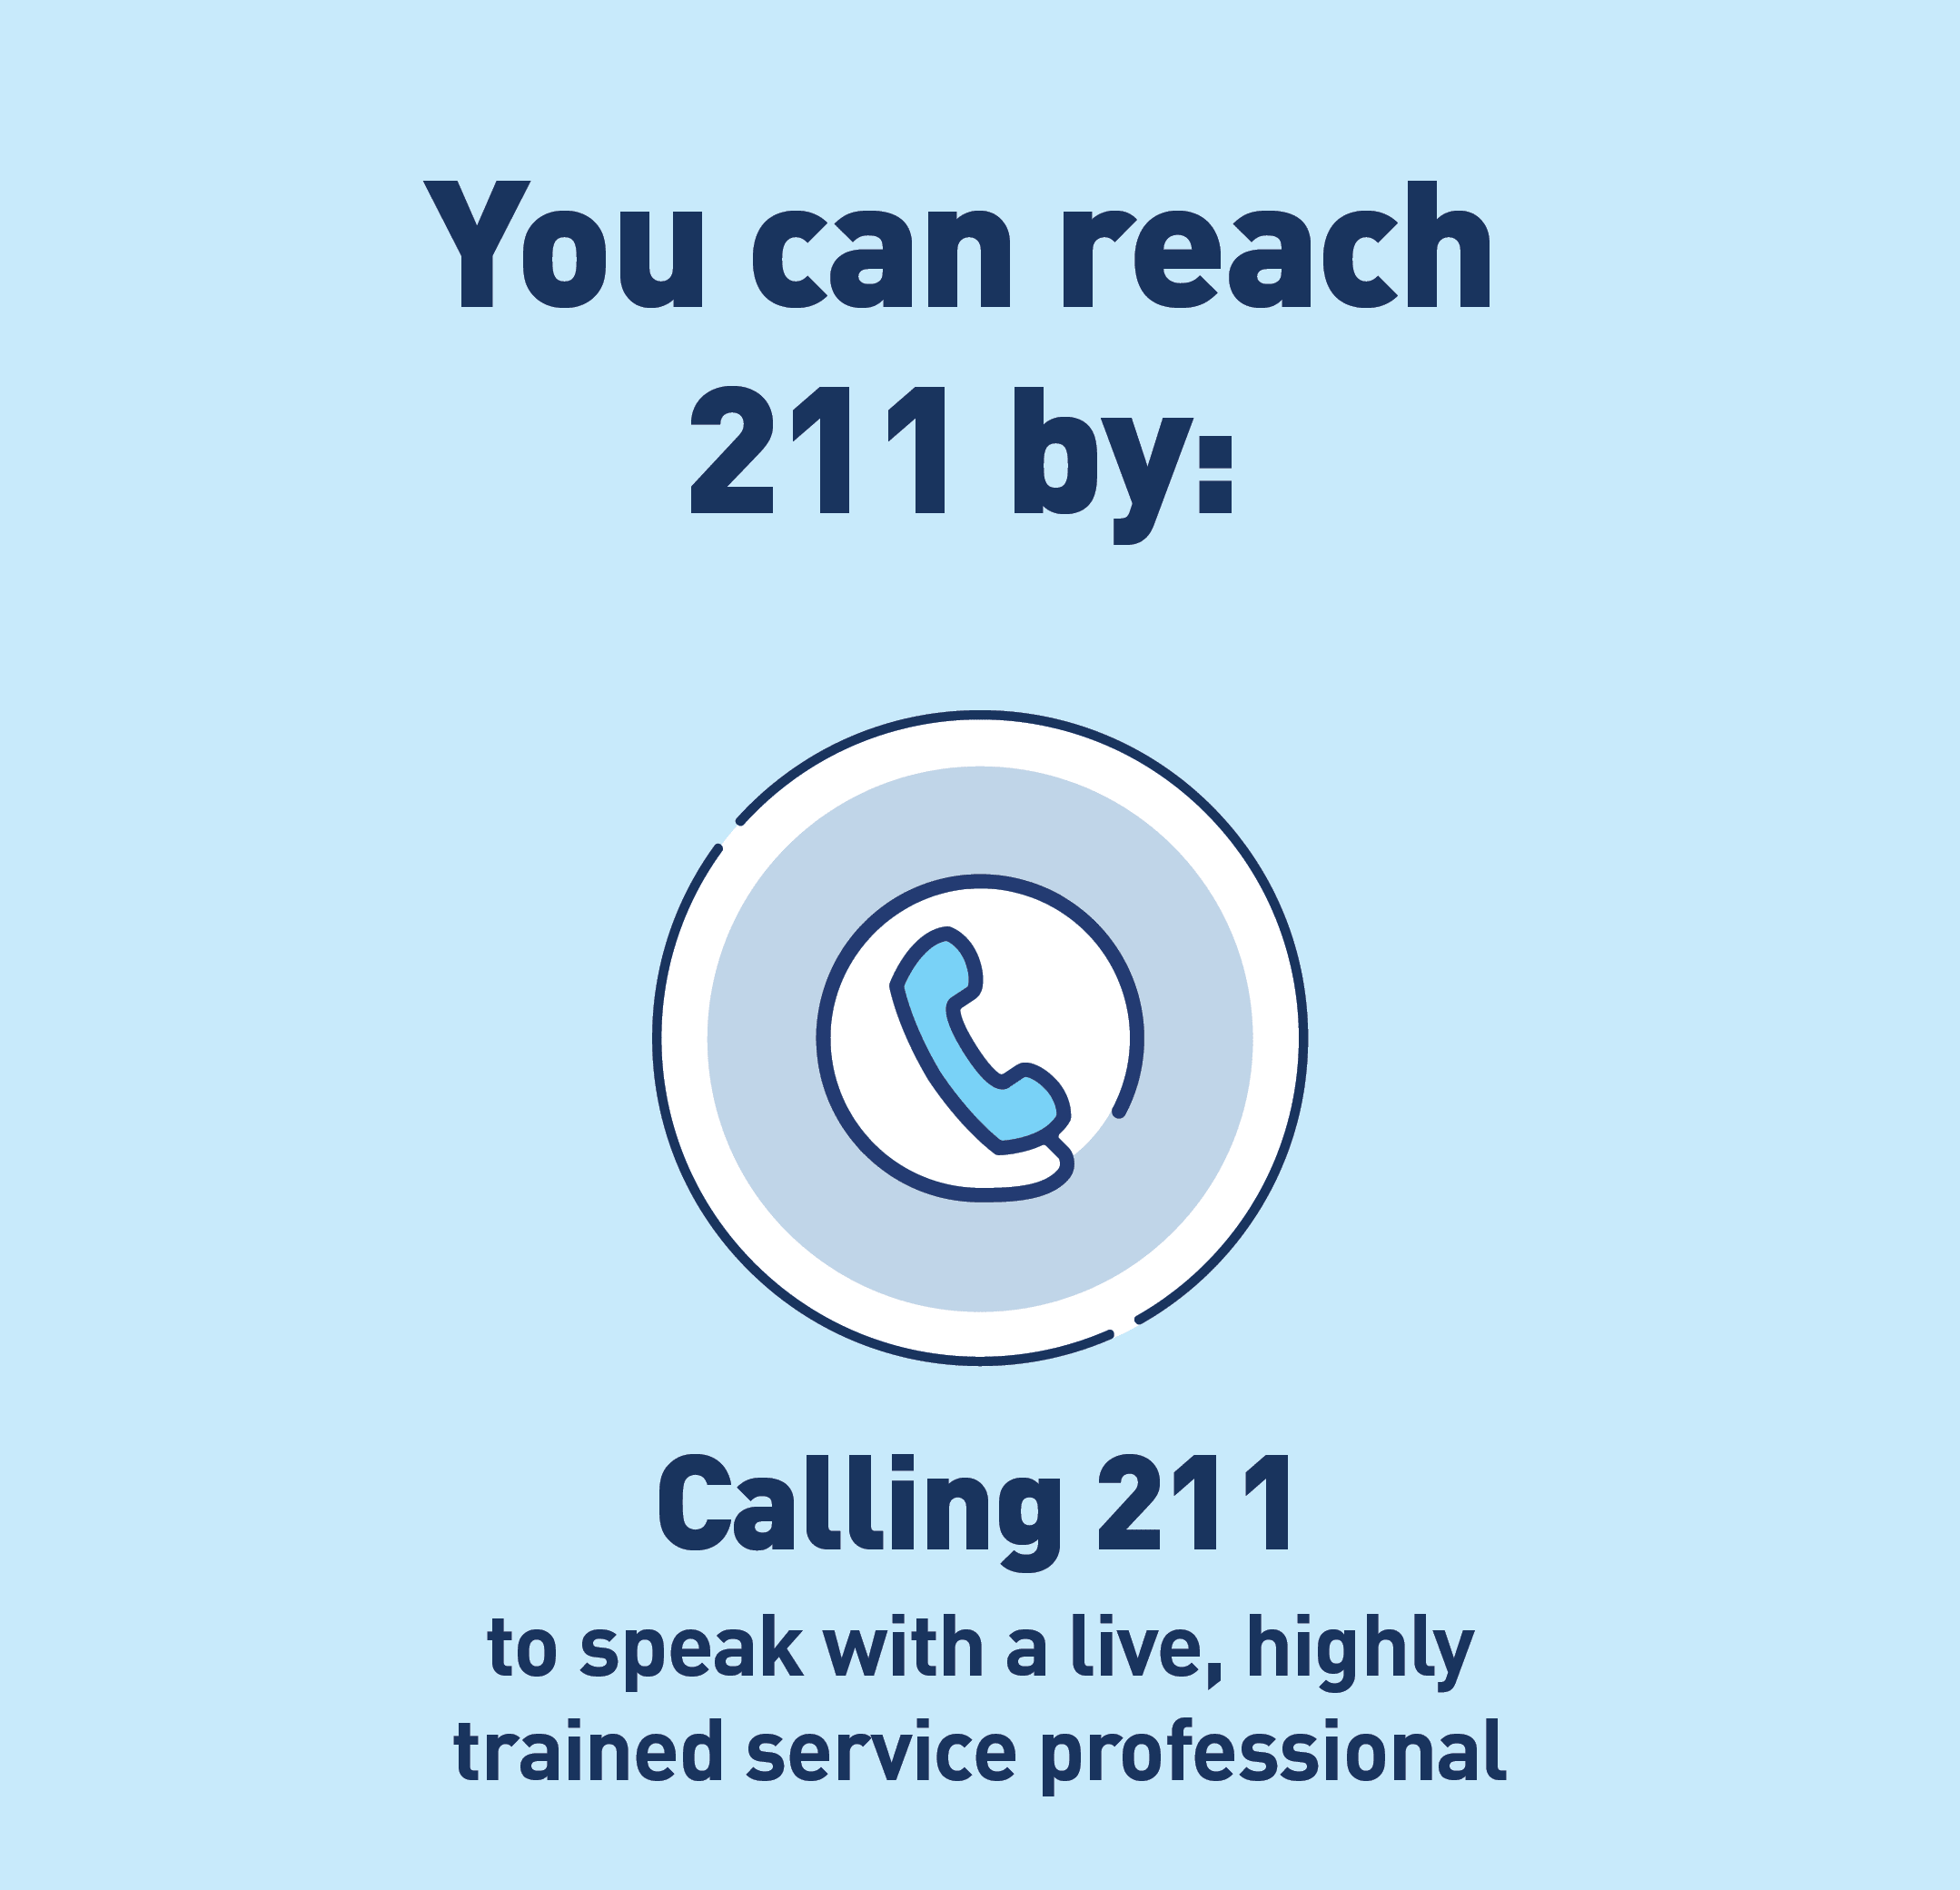 Graphic of a phone. Text: You can reach 211 by: Calling 211 to speak with a live, highly trained service professional.